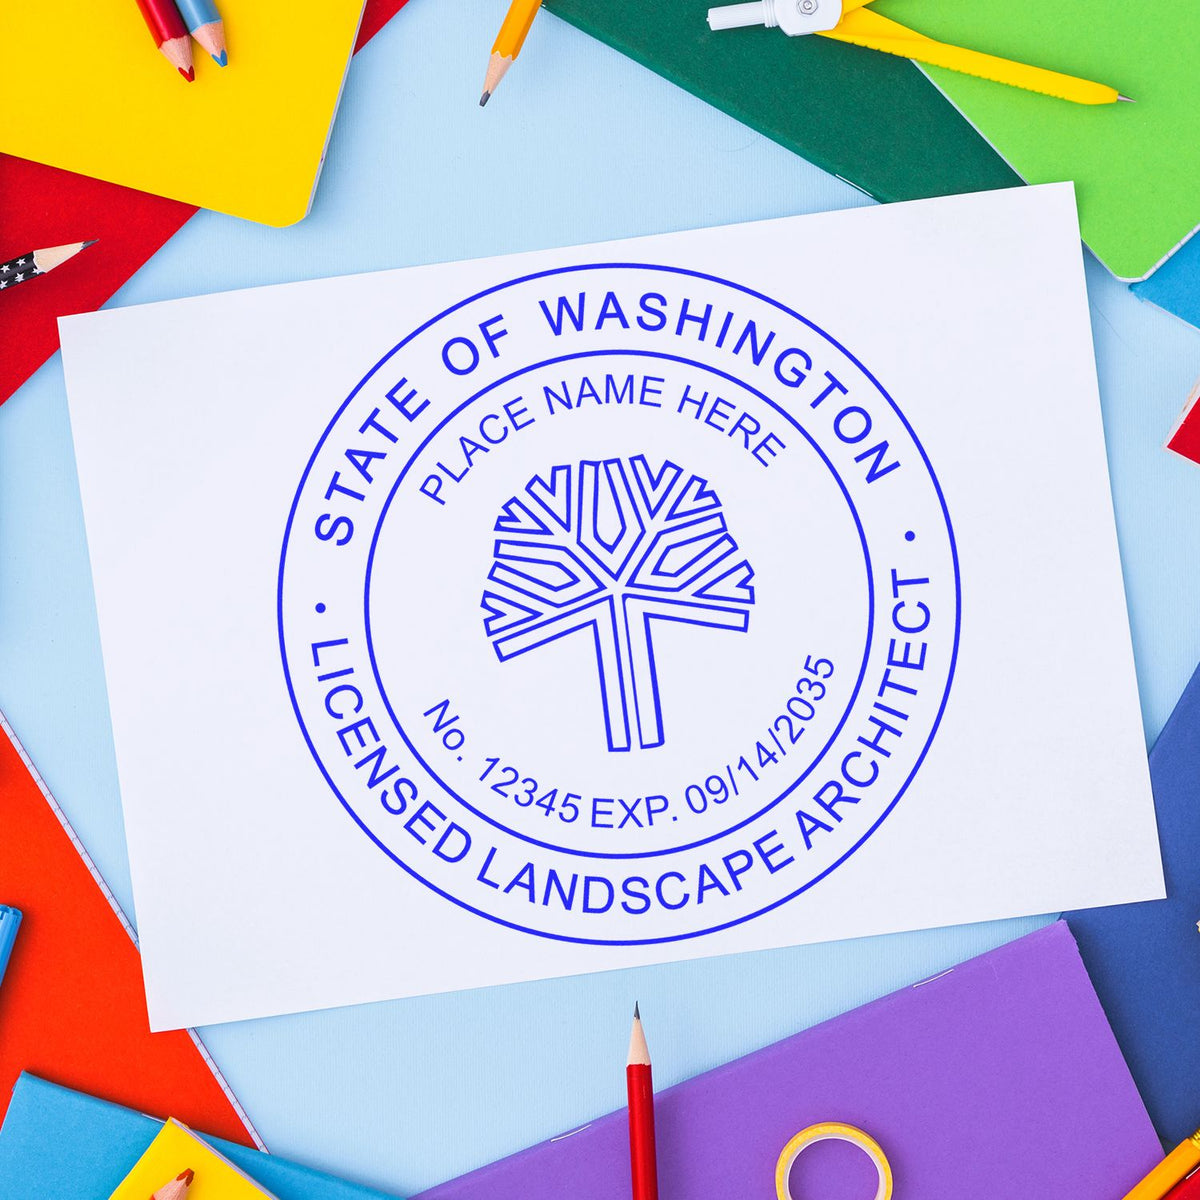 The Digital Washington Landscape Architect Stamp stamp impression comes to life with a crisp, detailed photo on paper - showcasing true professional quality.